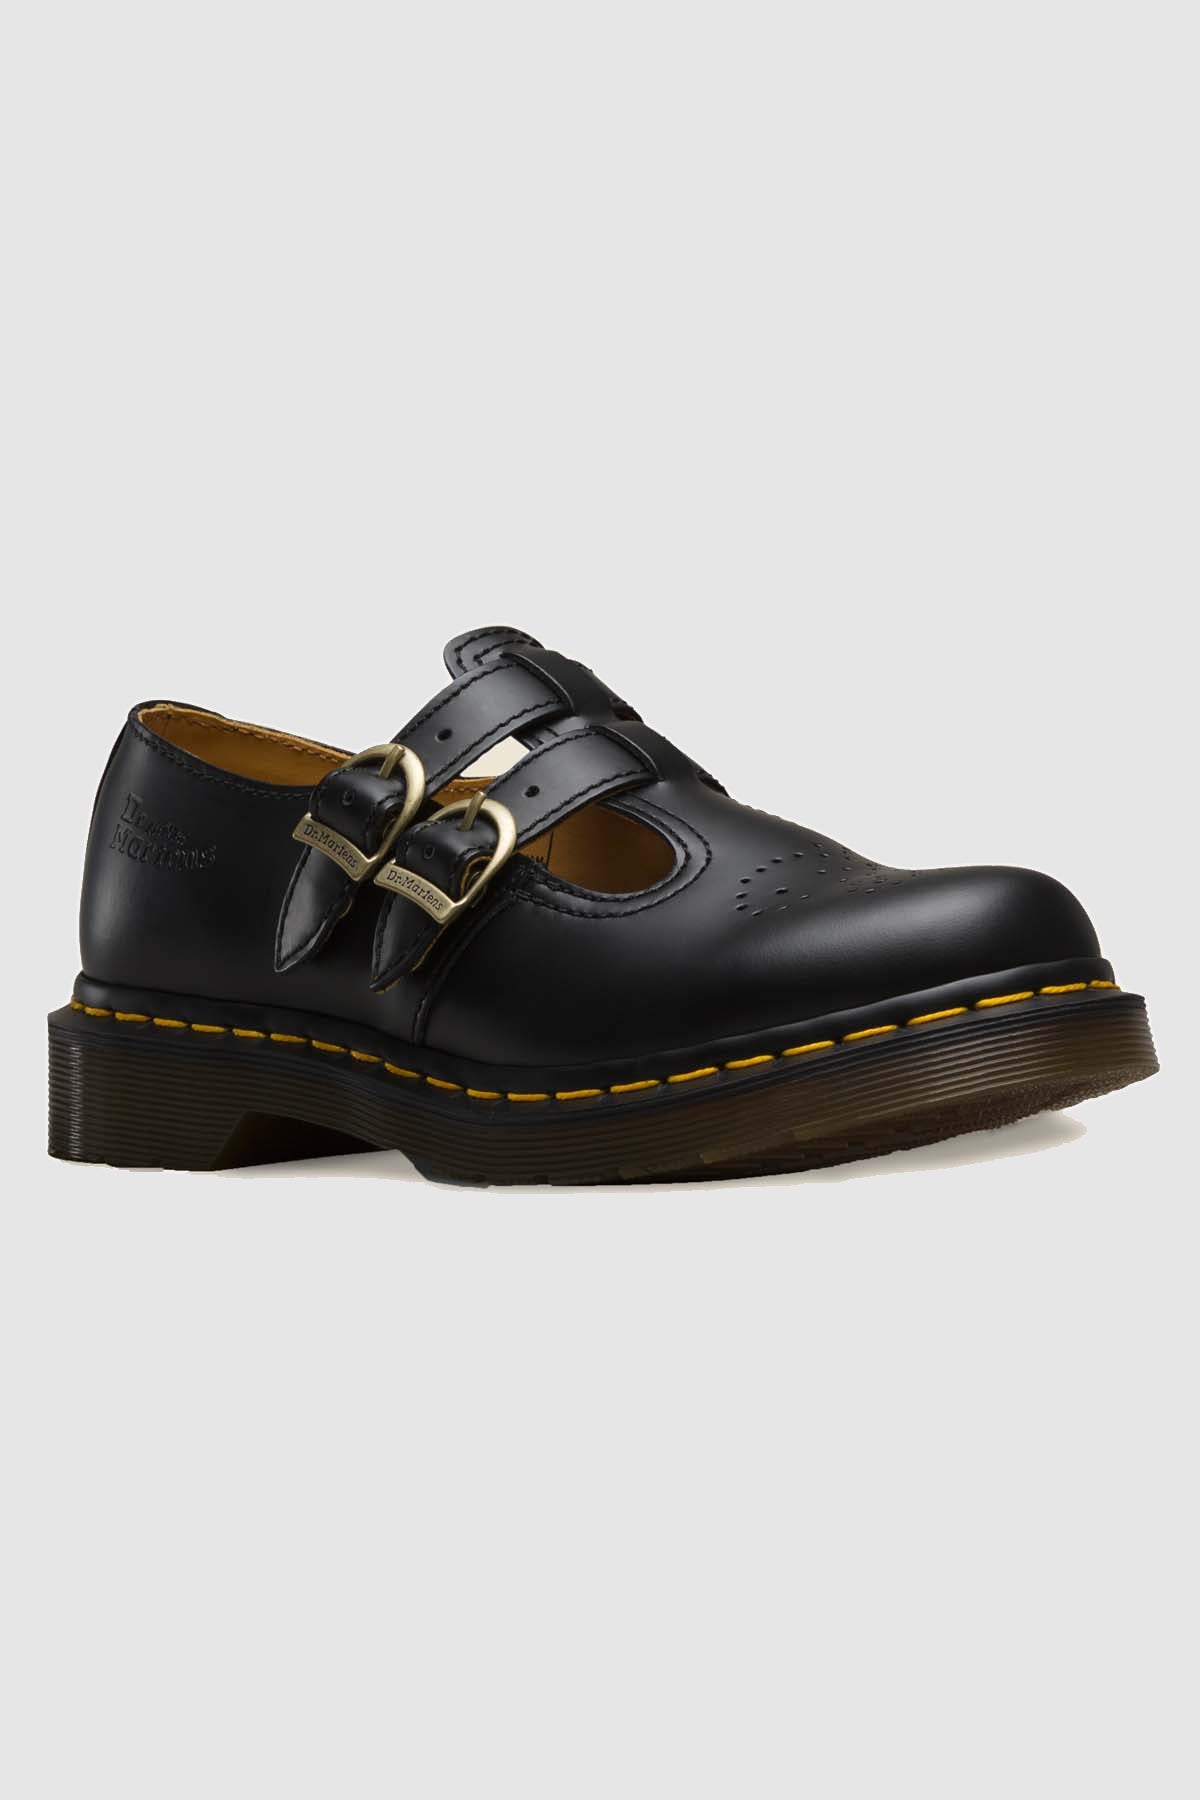 Dr Martens Womens 8065 Mary Jane Black Smooth